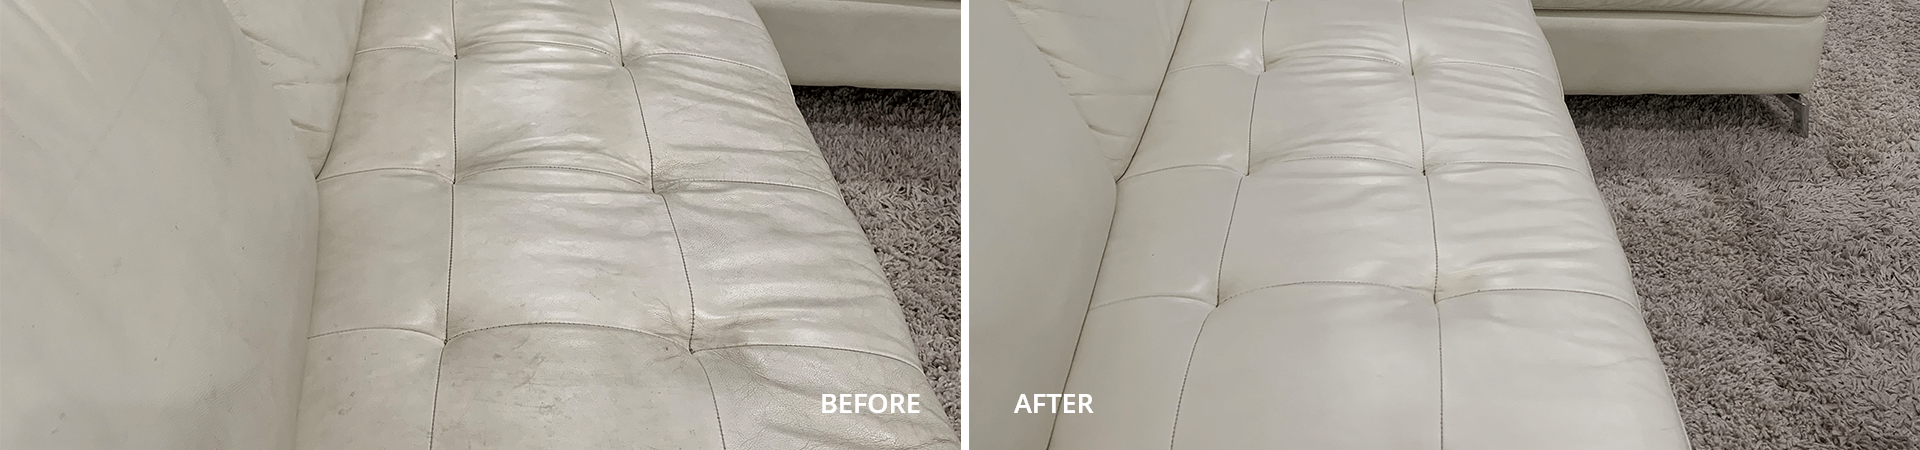 How to Clean and Condition Your Leather Lounge in Less than 1 Hour